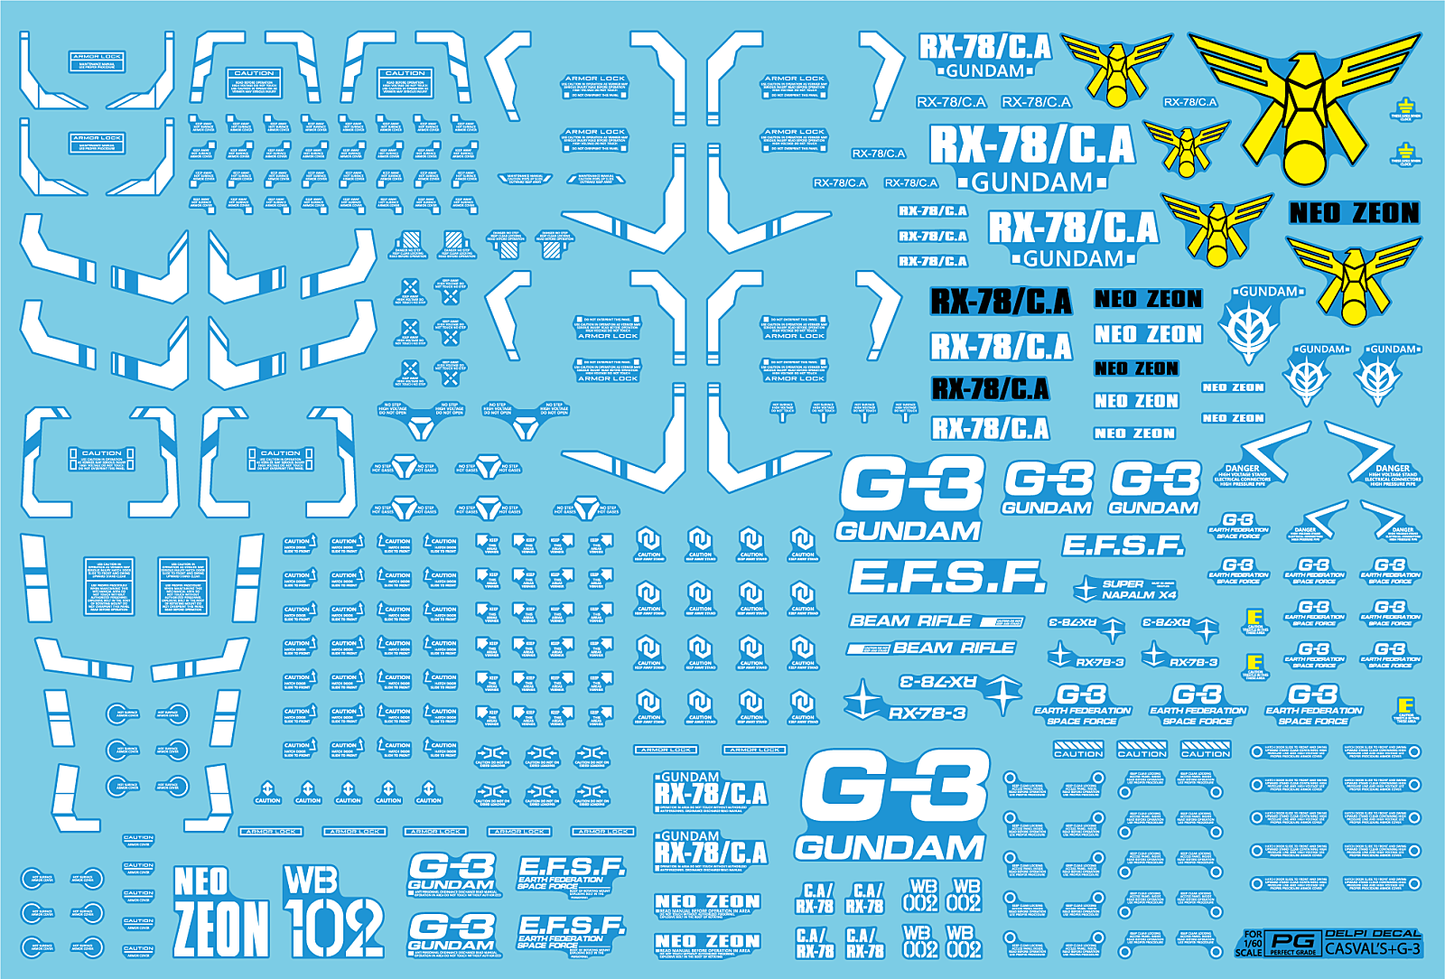 Delpi - PG RX-78/C.A CASVAL + G3 WATER DECAL